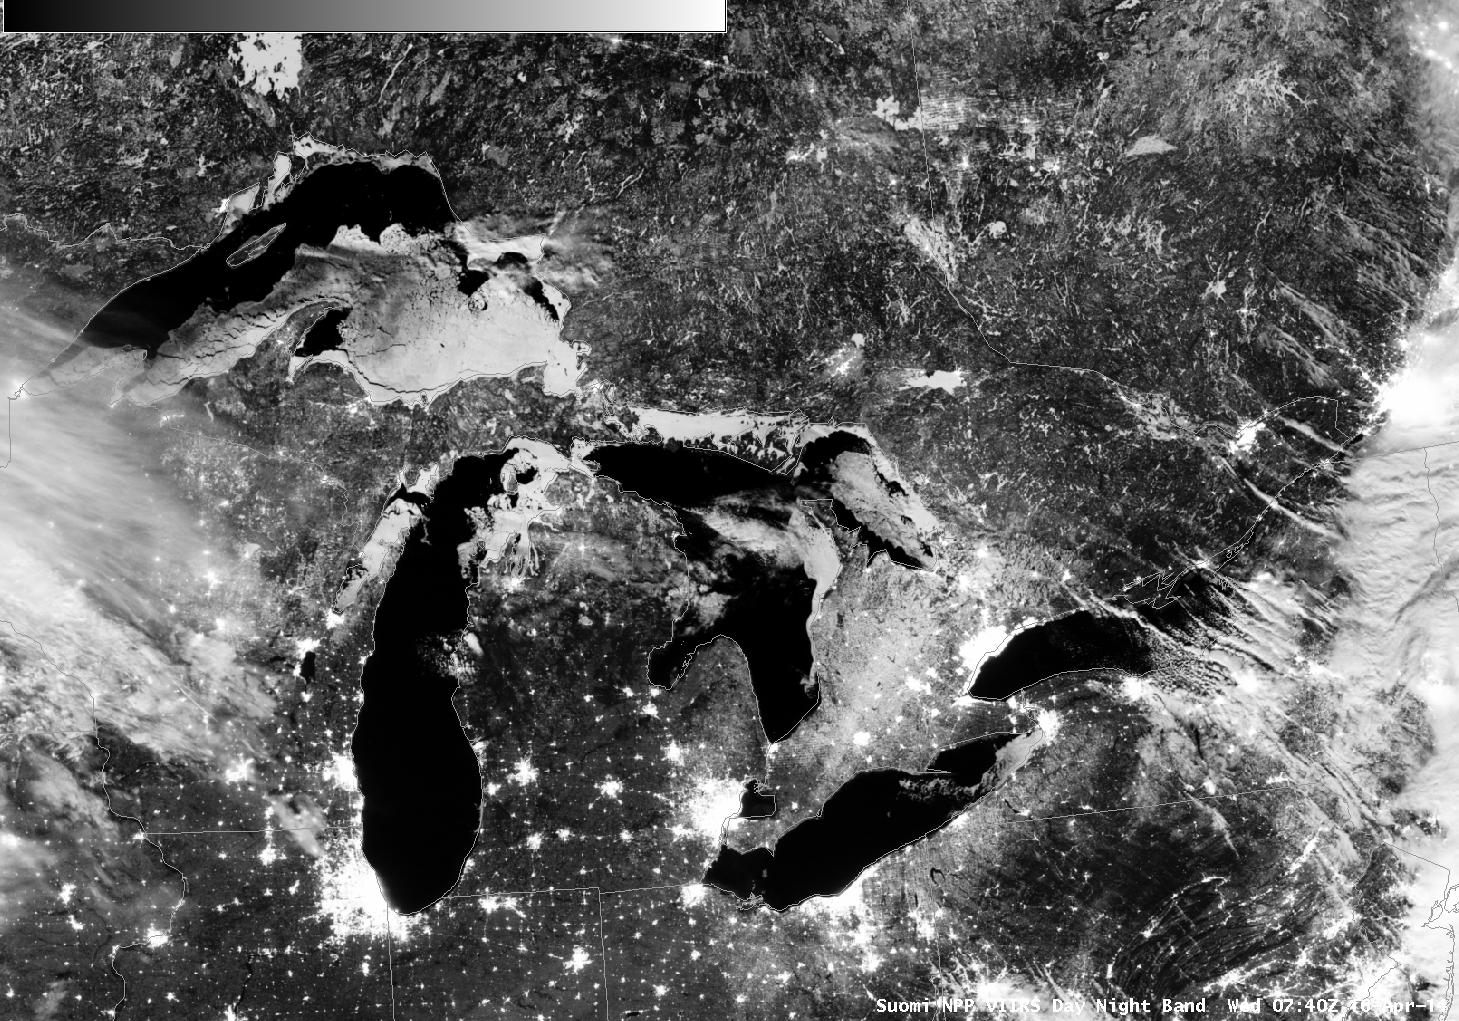 Suomi/NPP VIIRS Day Night Band imagery, 0740 UTC on 16 April 2014 [Click to enlarge]